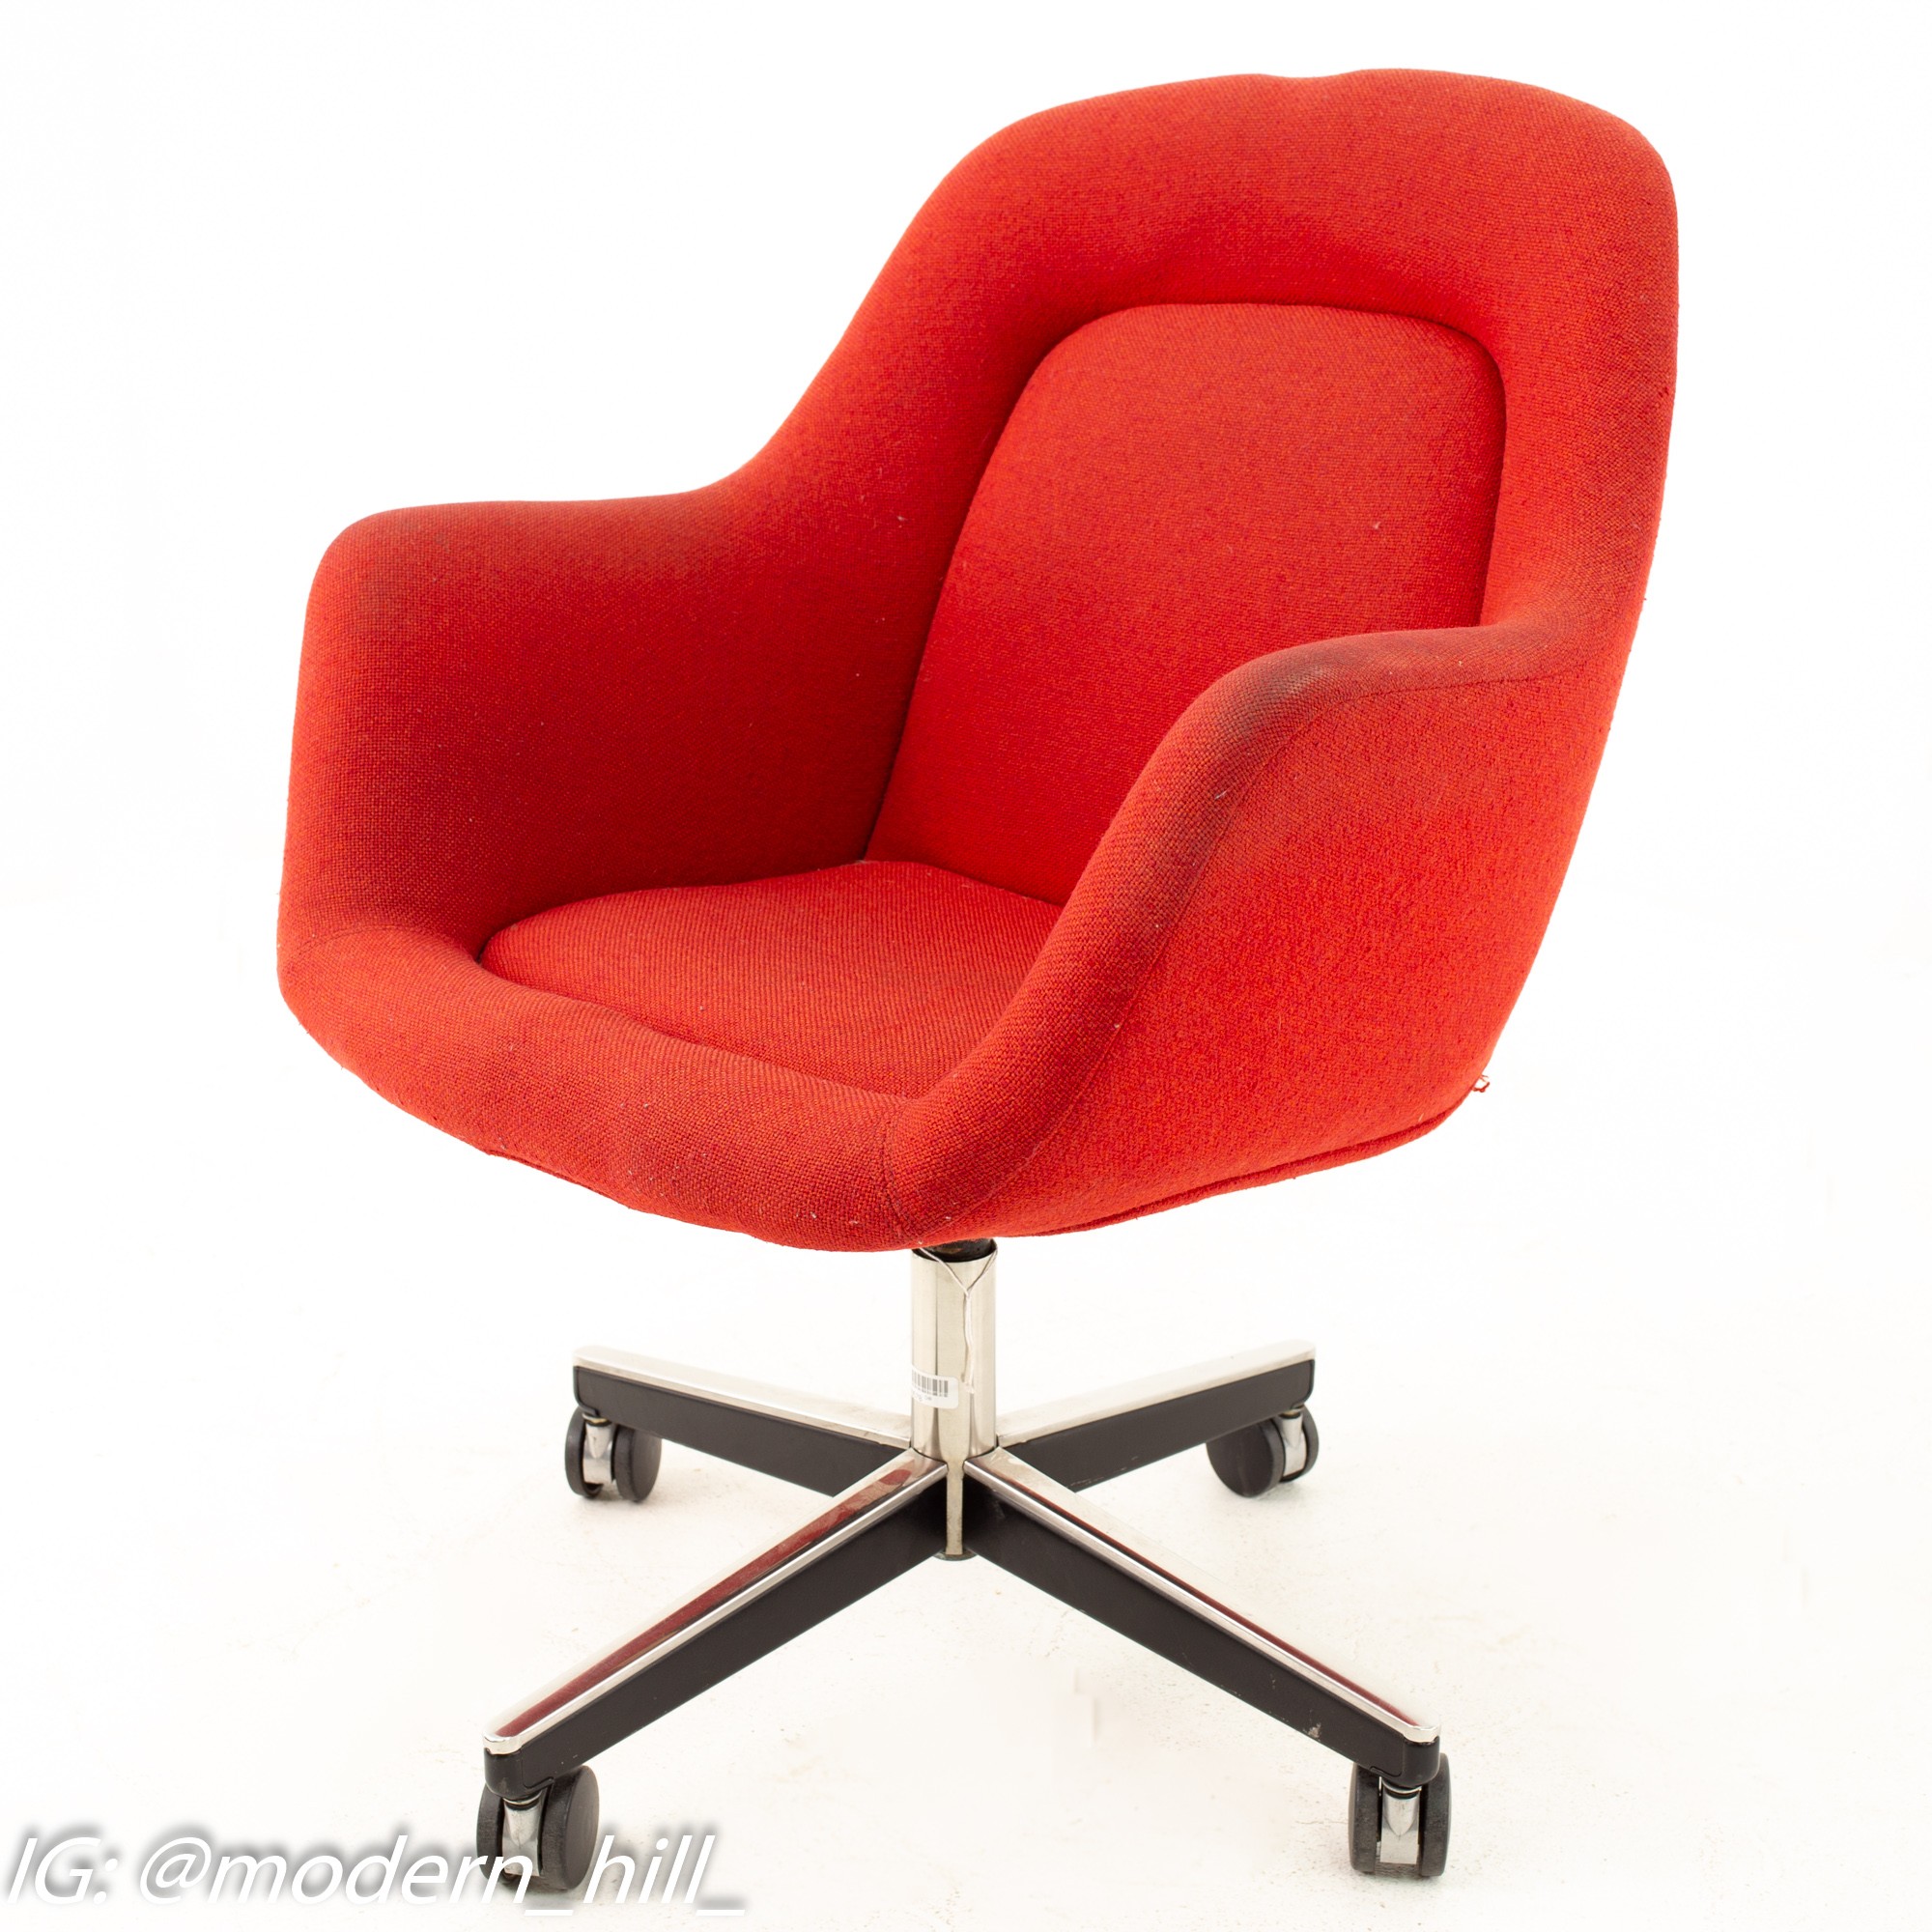 Max Pearson for Knoll Mid Century Red Upholstered Office Desk Chair